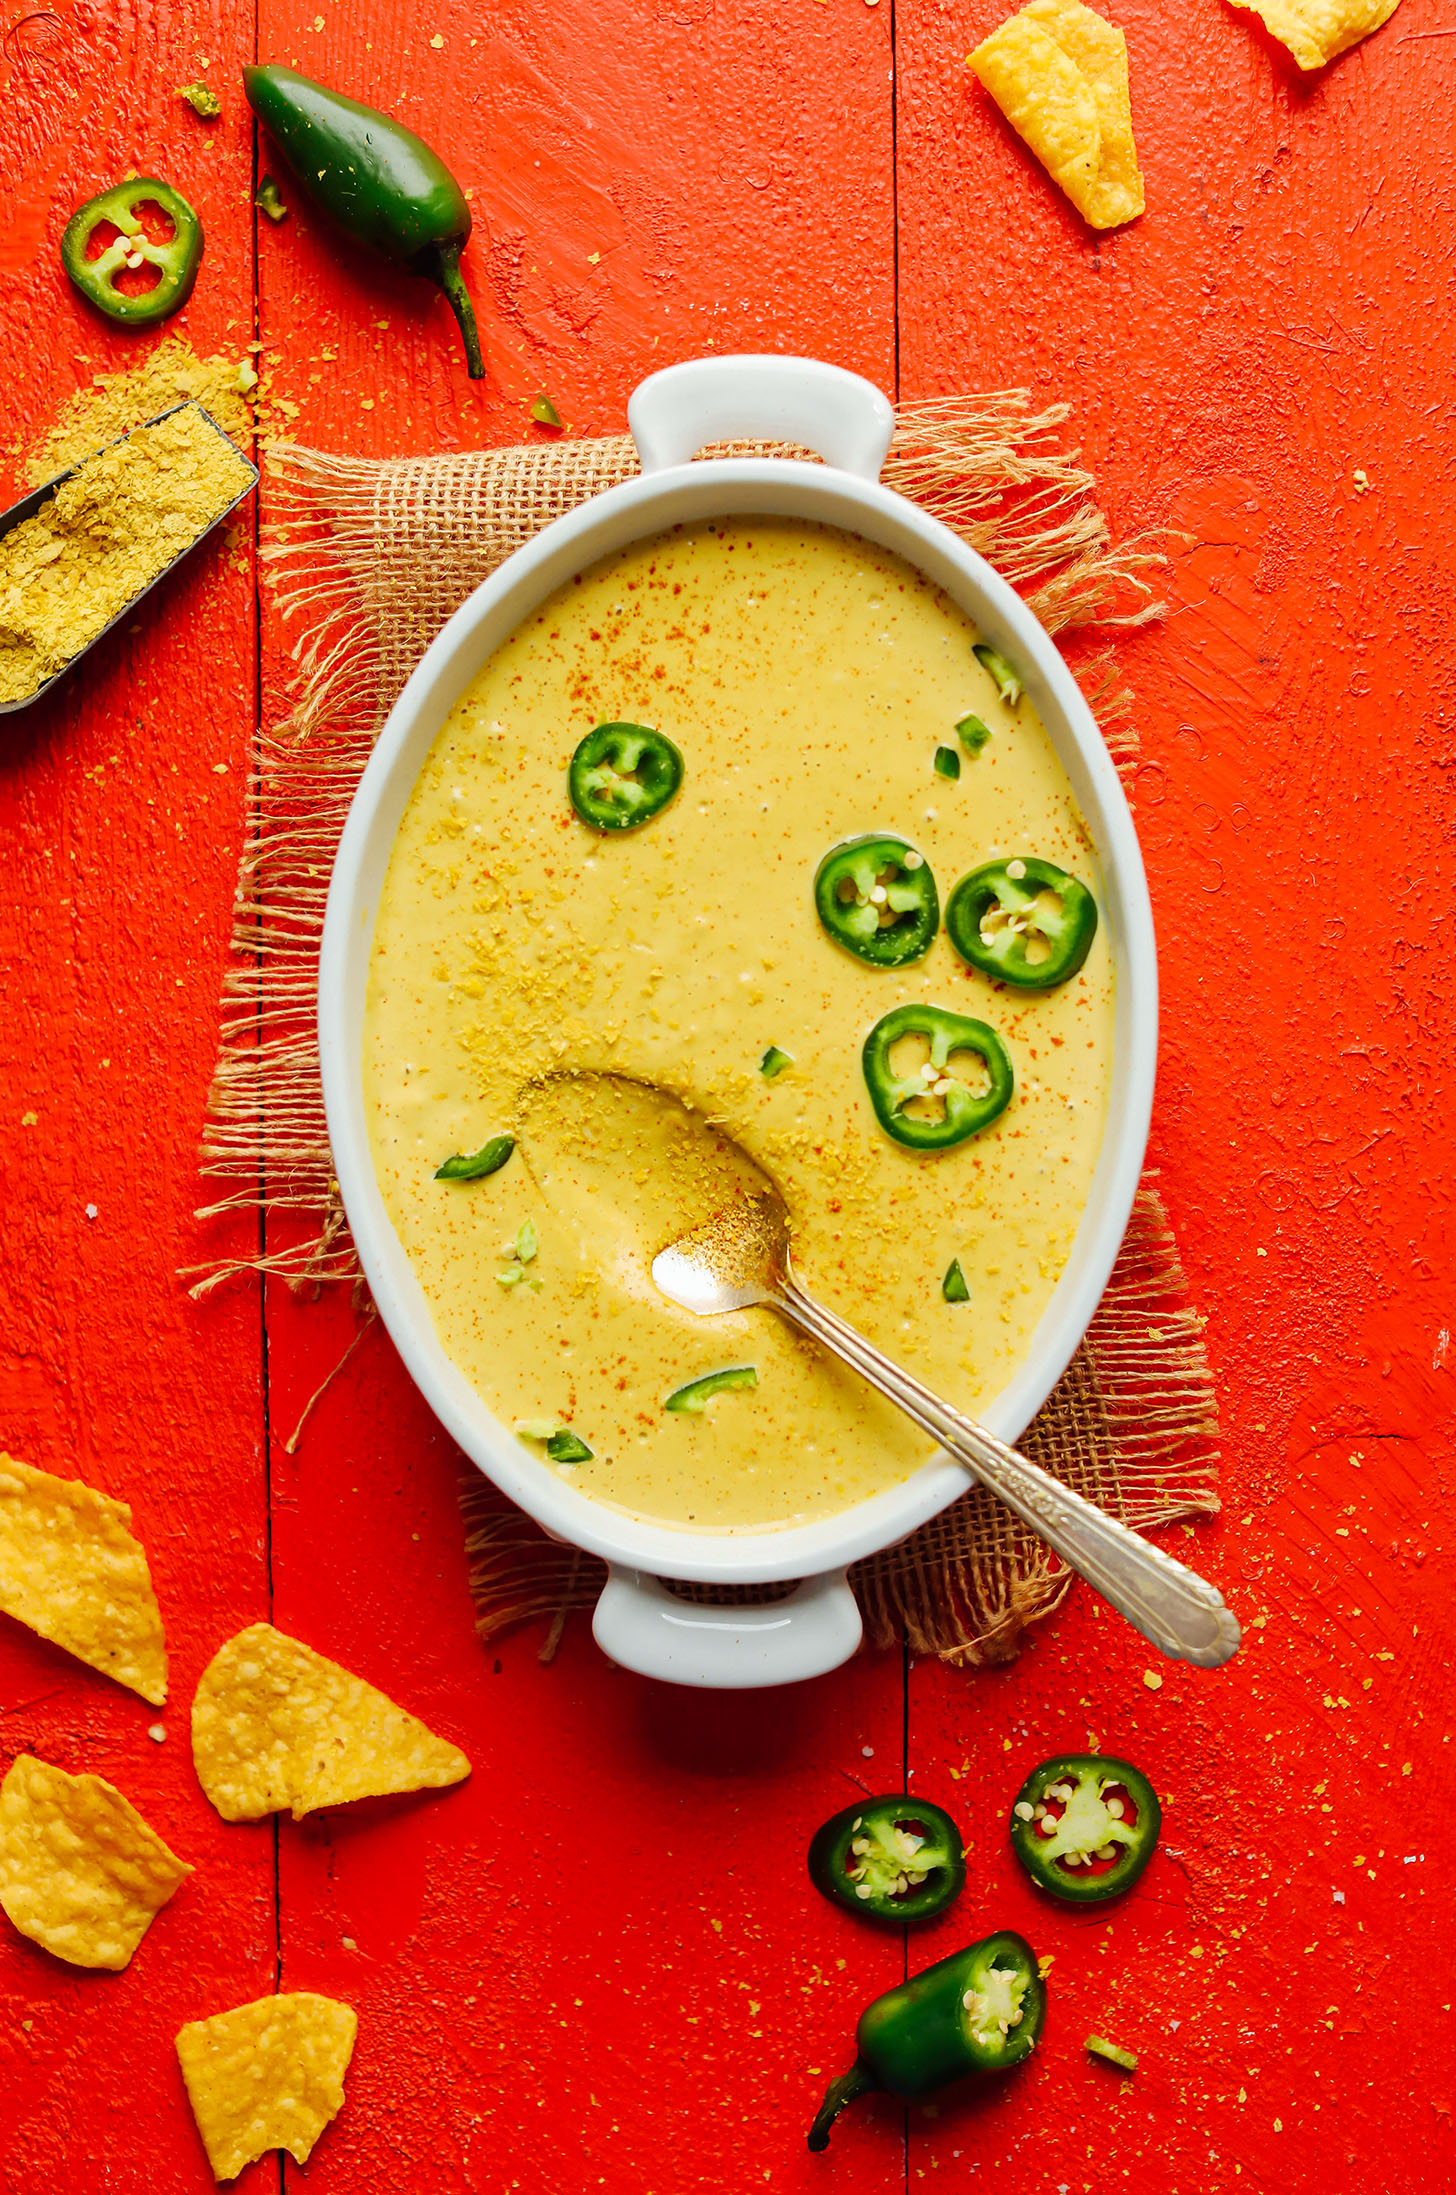 Serving dish filled with Creamy Roasted Jalapeno Vegan Queso cheese dip